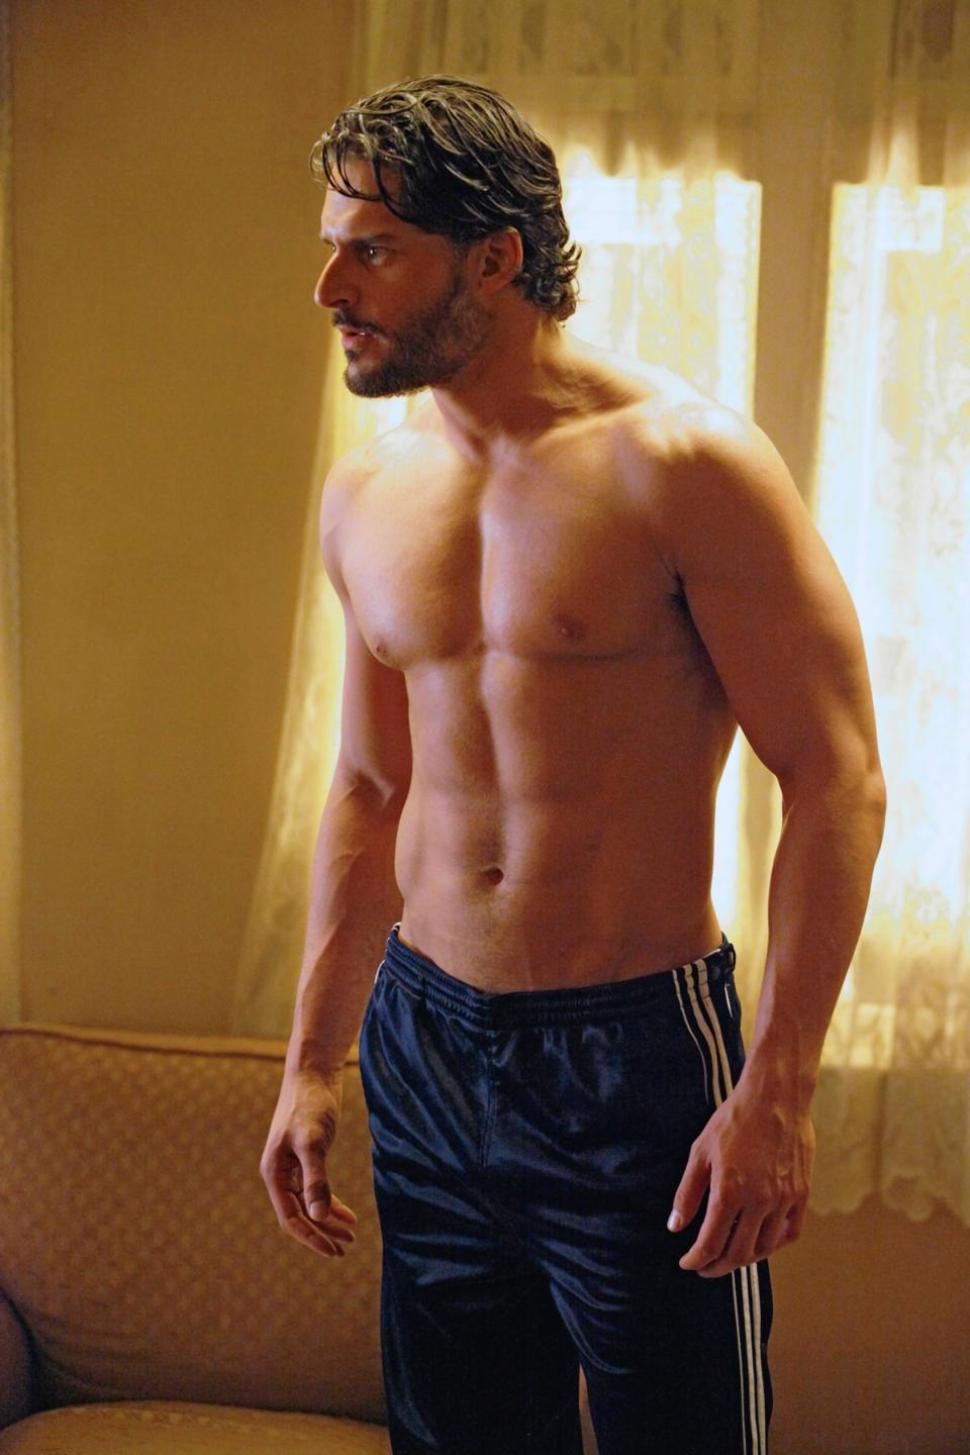 If there are naked photos of Joe Manganiello out there, Kathie Lee wants to see them.